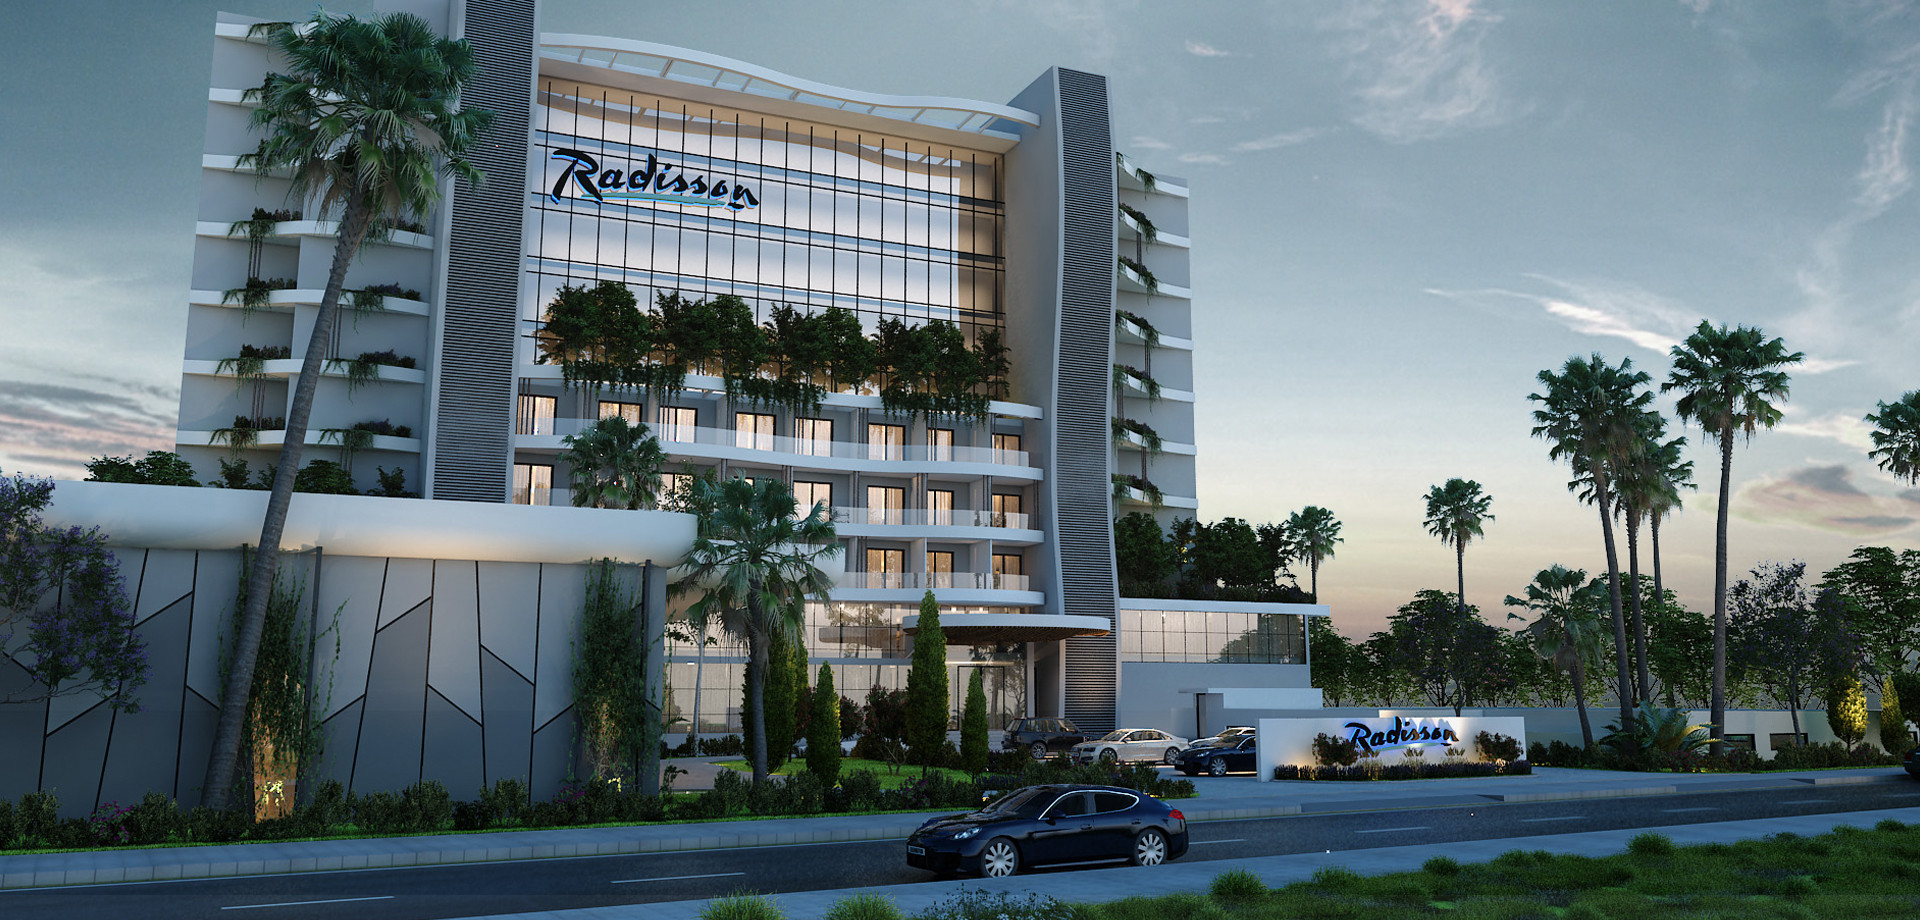 FLUID - The architects behind the first Radisson Beach Resort in Cyprus